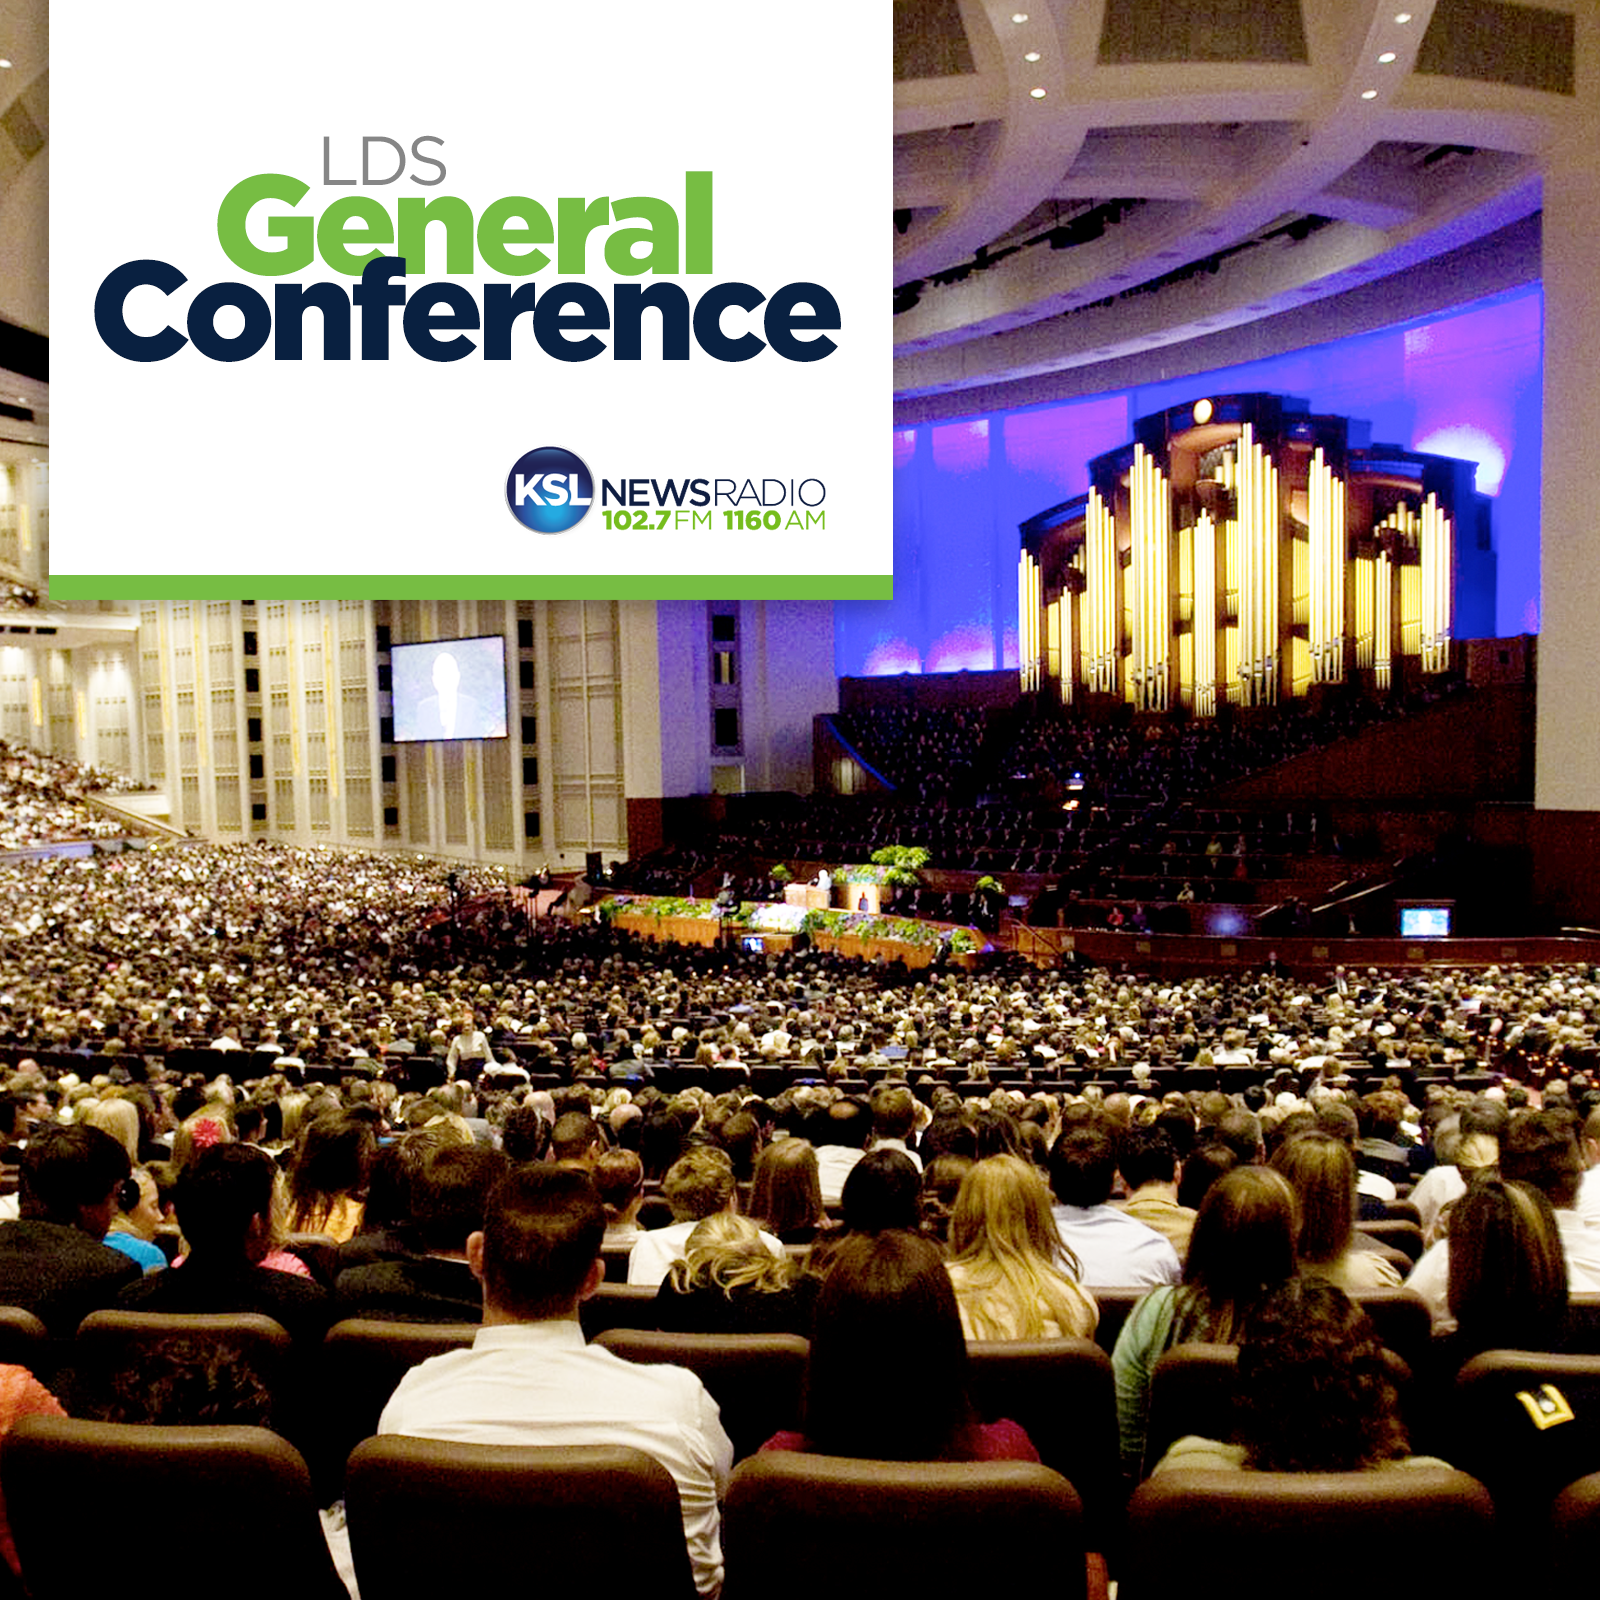 Sunday morning general conference session - October 2, 2016